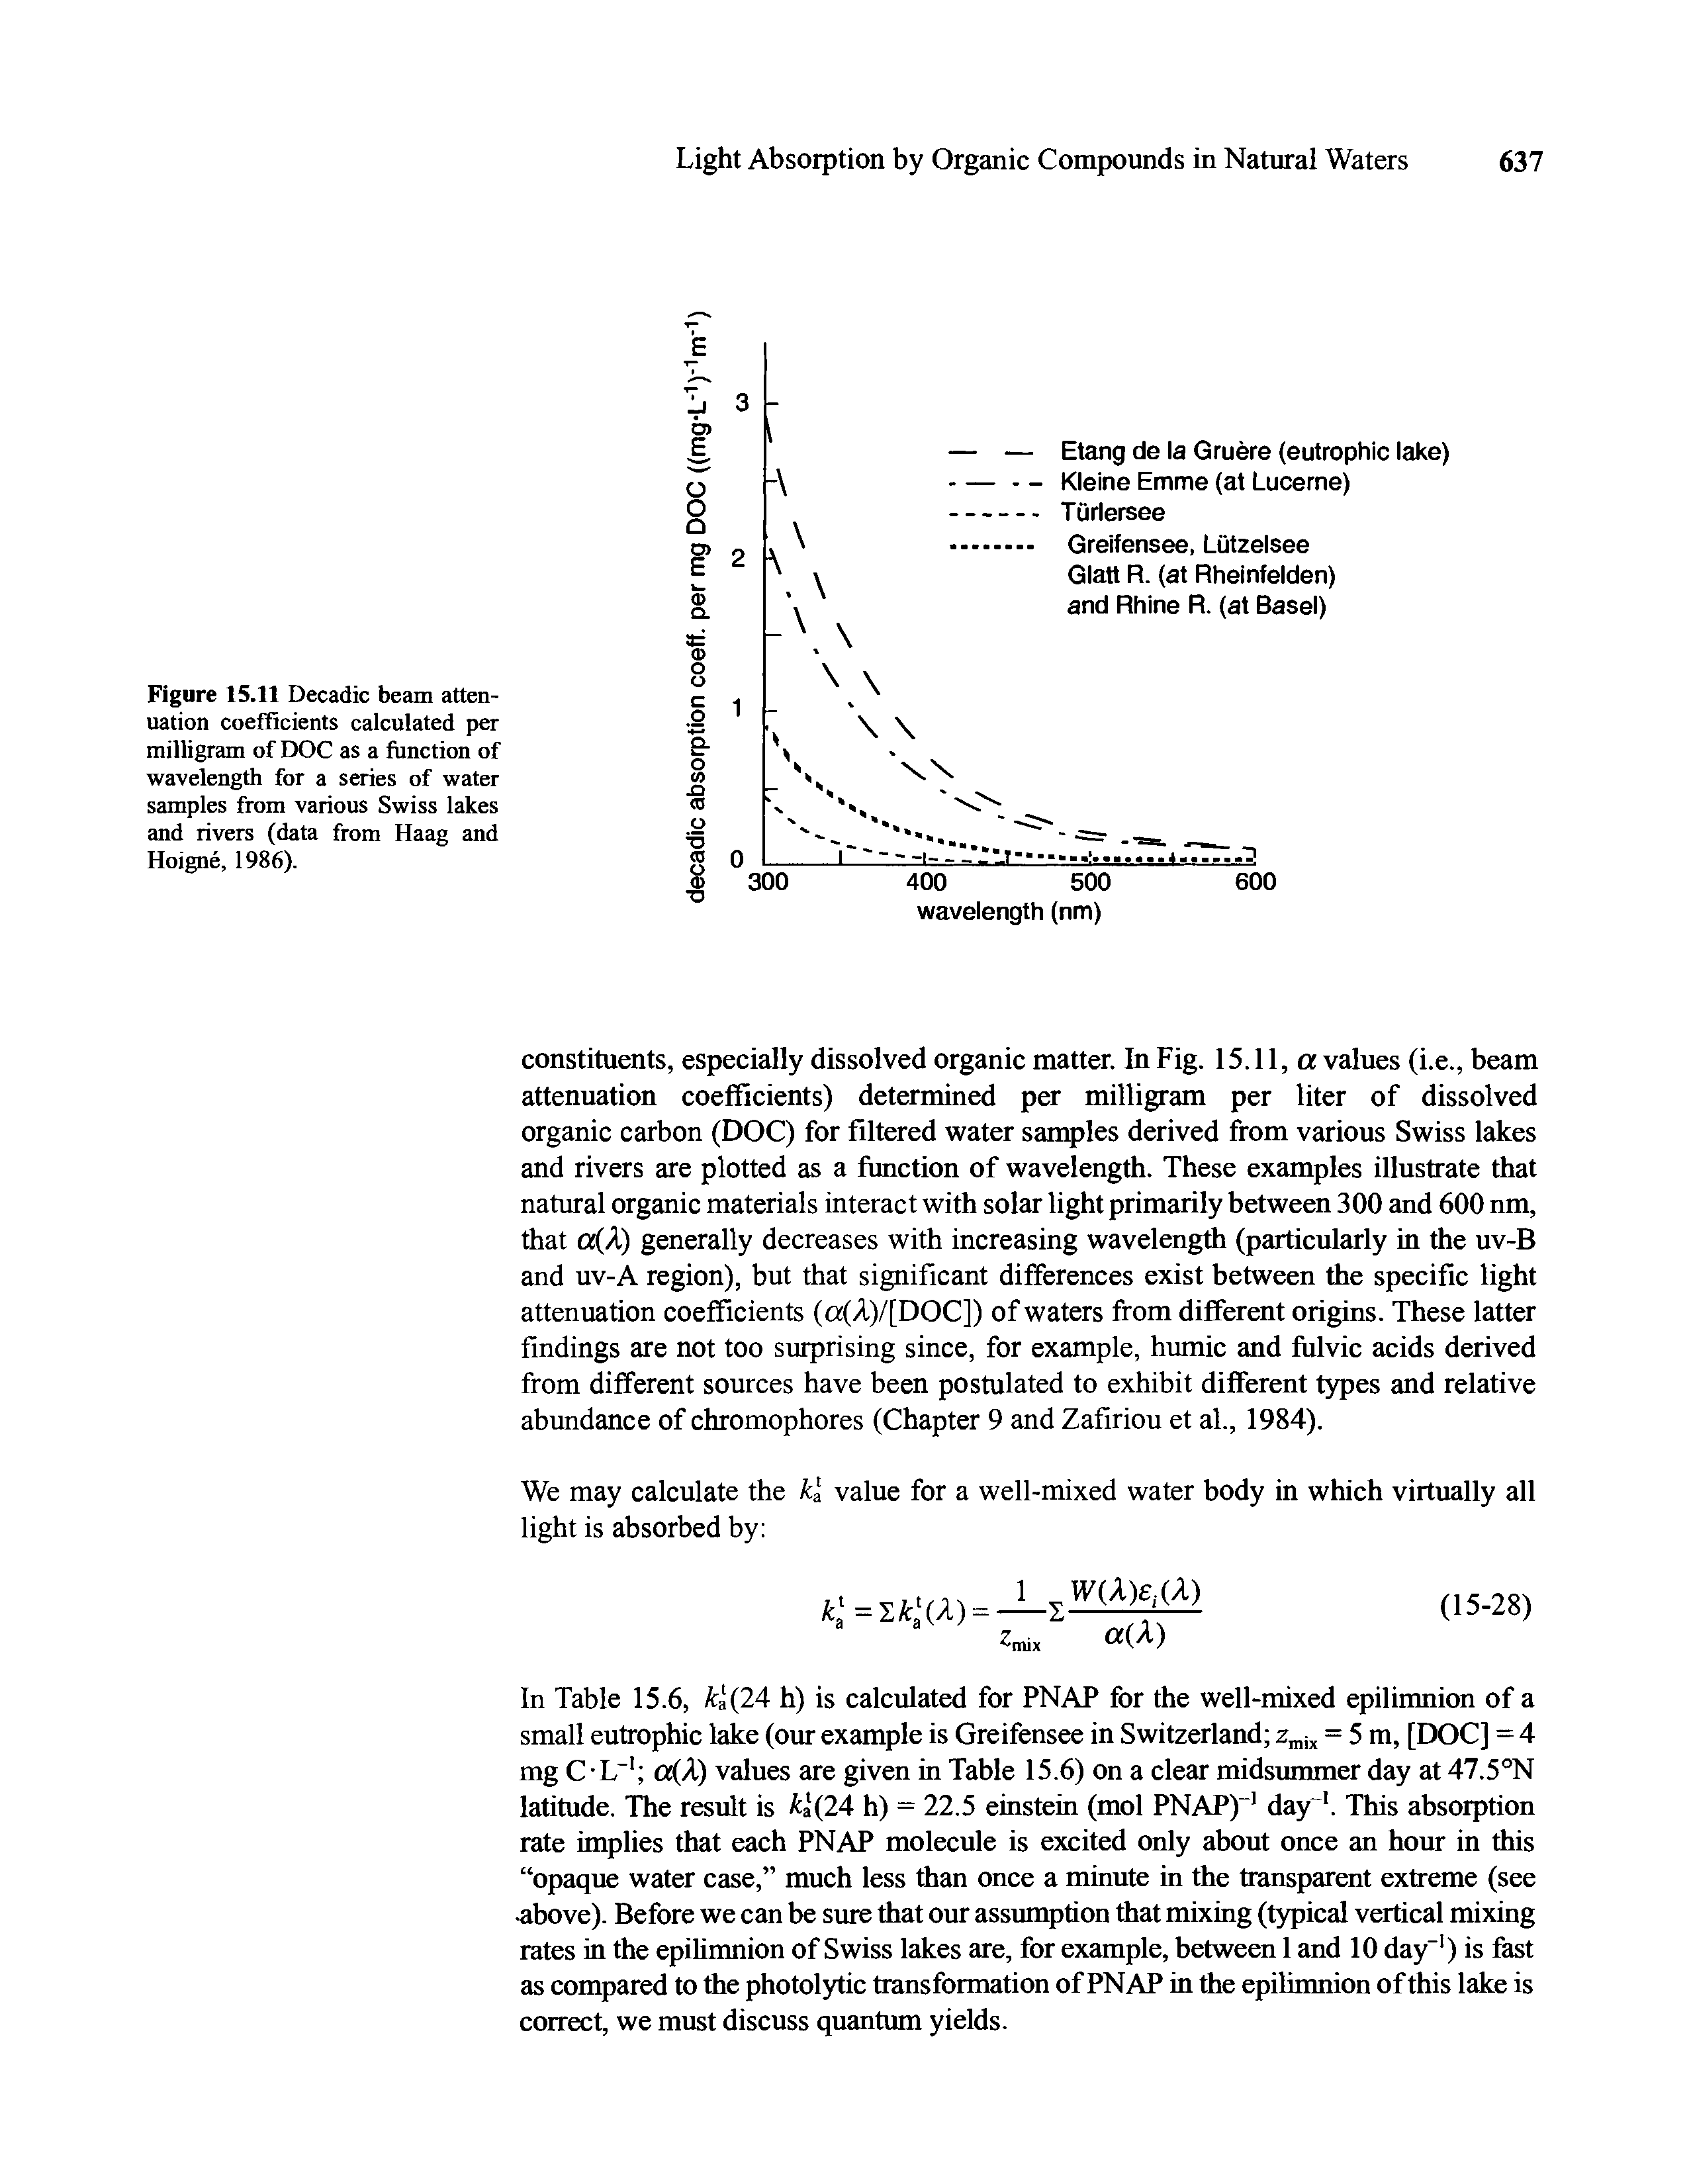 Figure 15.11 Decadic beam attenuation coefficients calculated per milligram of DOC as a function of wavelength for a series of water samples from various Swiss lakes and rivers (data from Haag and Hoigne, 1986).